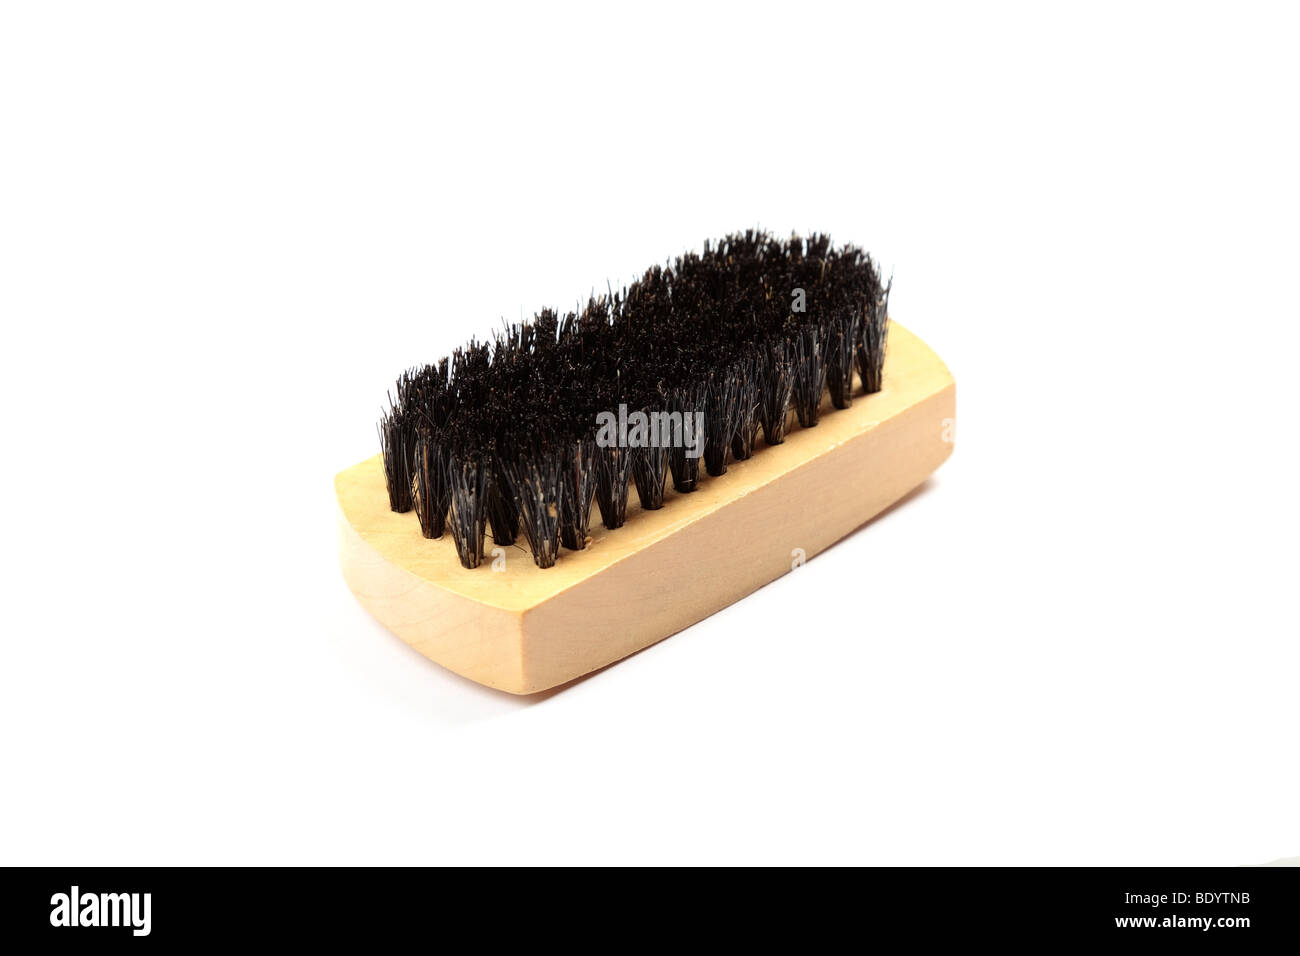 Wooden brush for cleaning clothes isolated on white background. Stock Photo